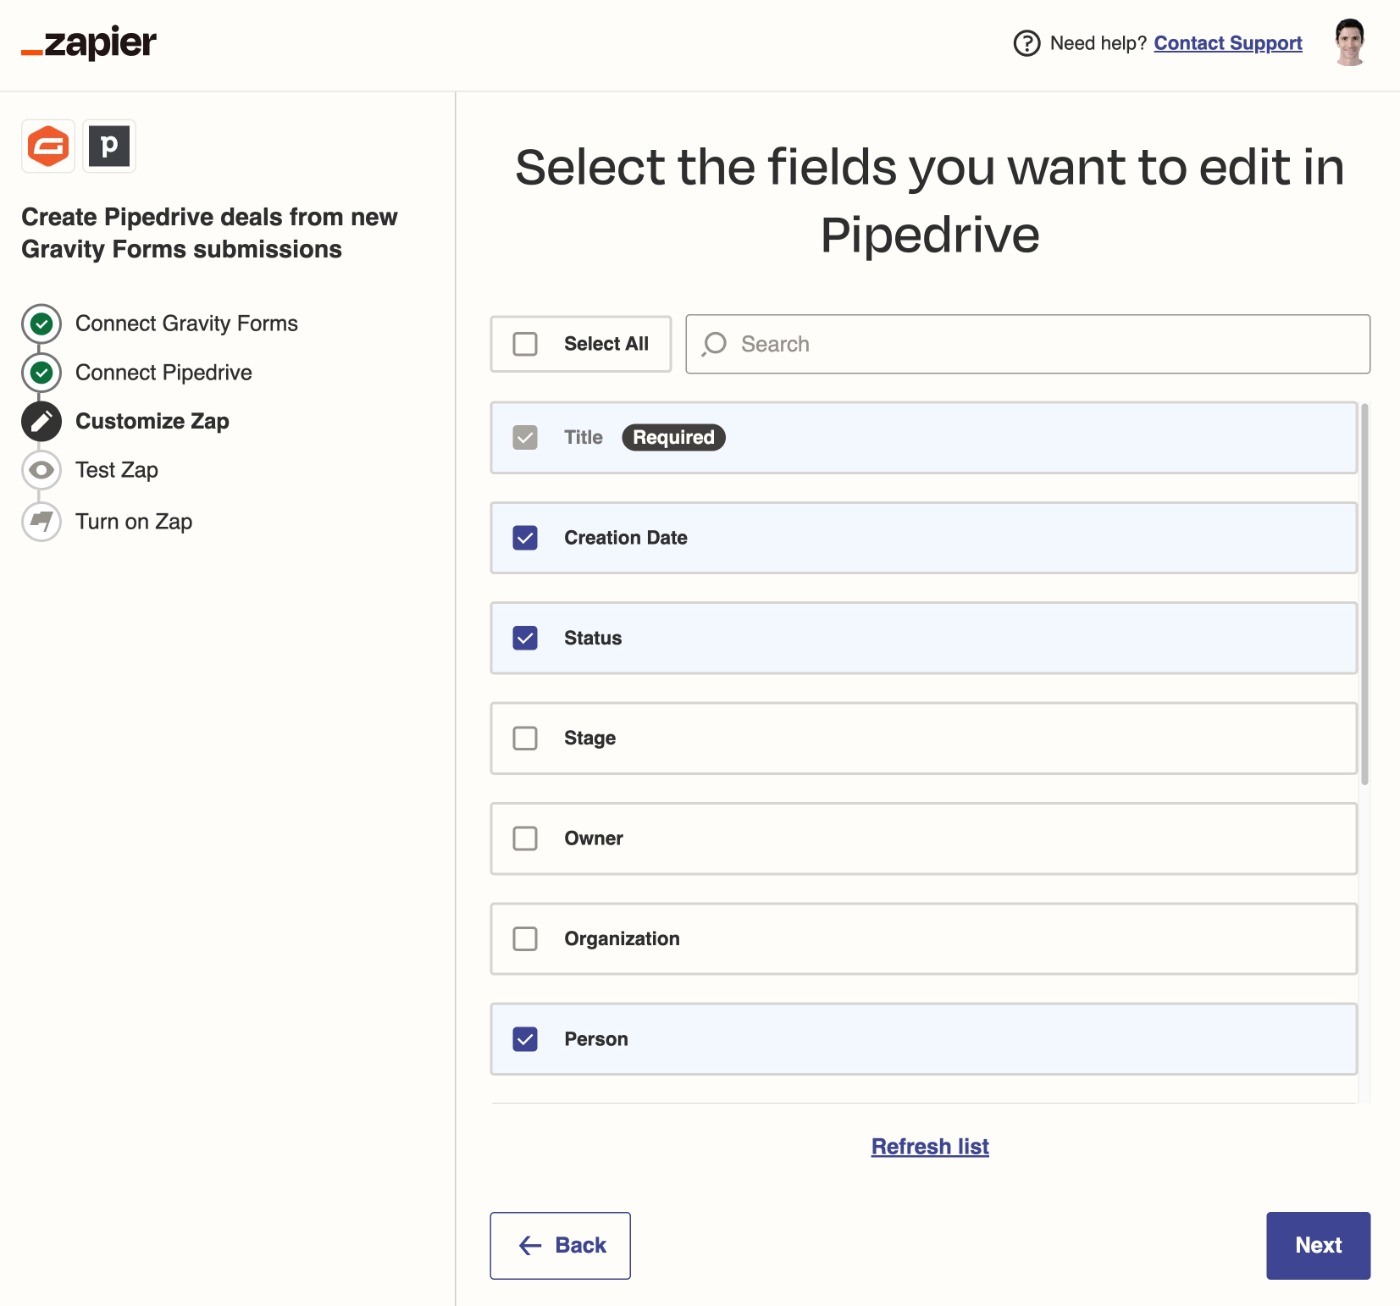 Edit fields to send to Pipedrive